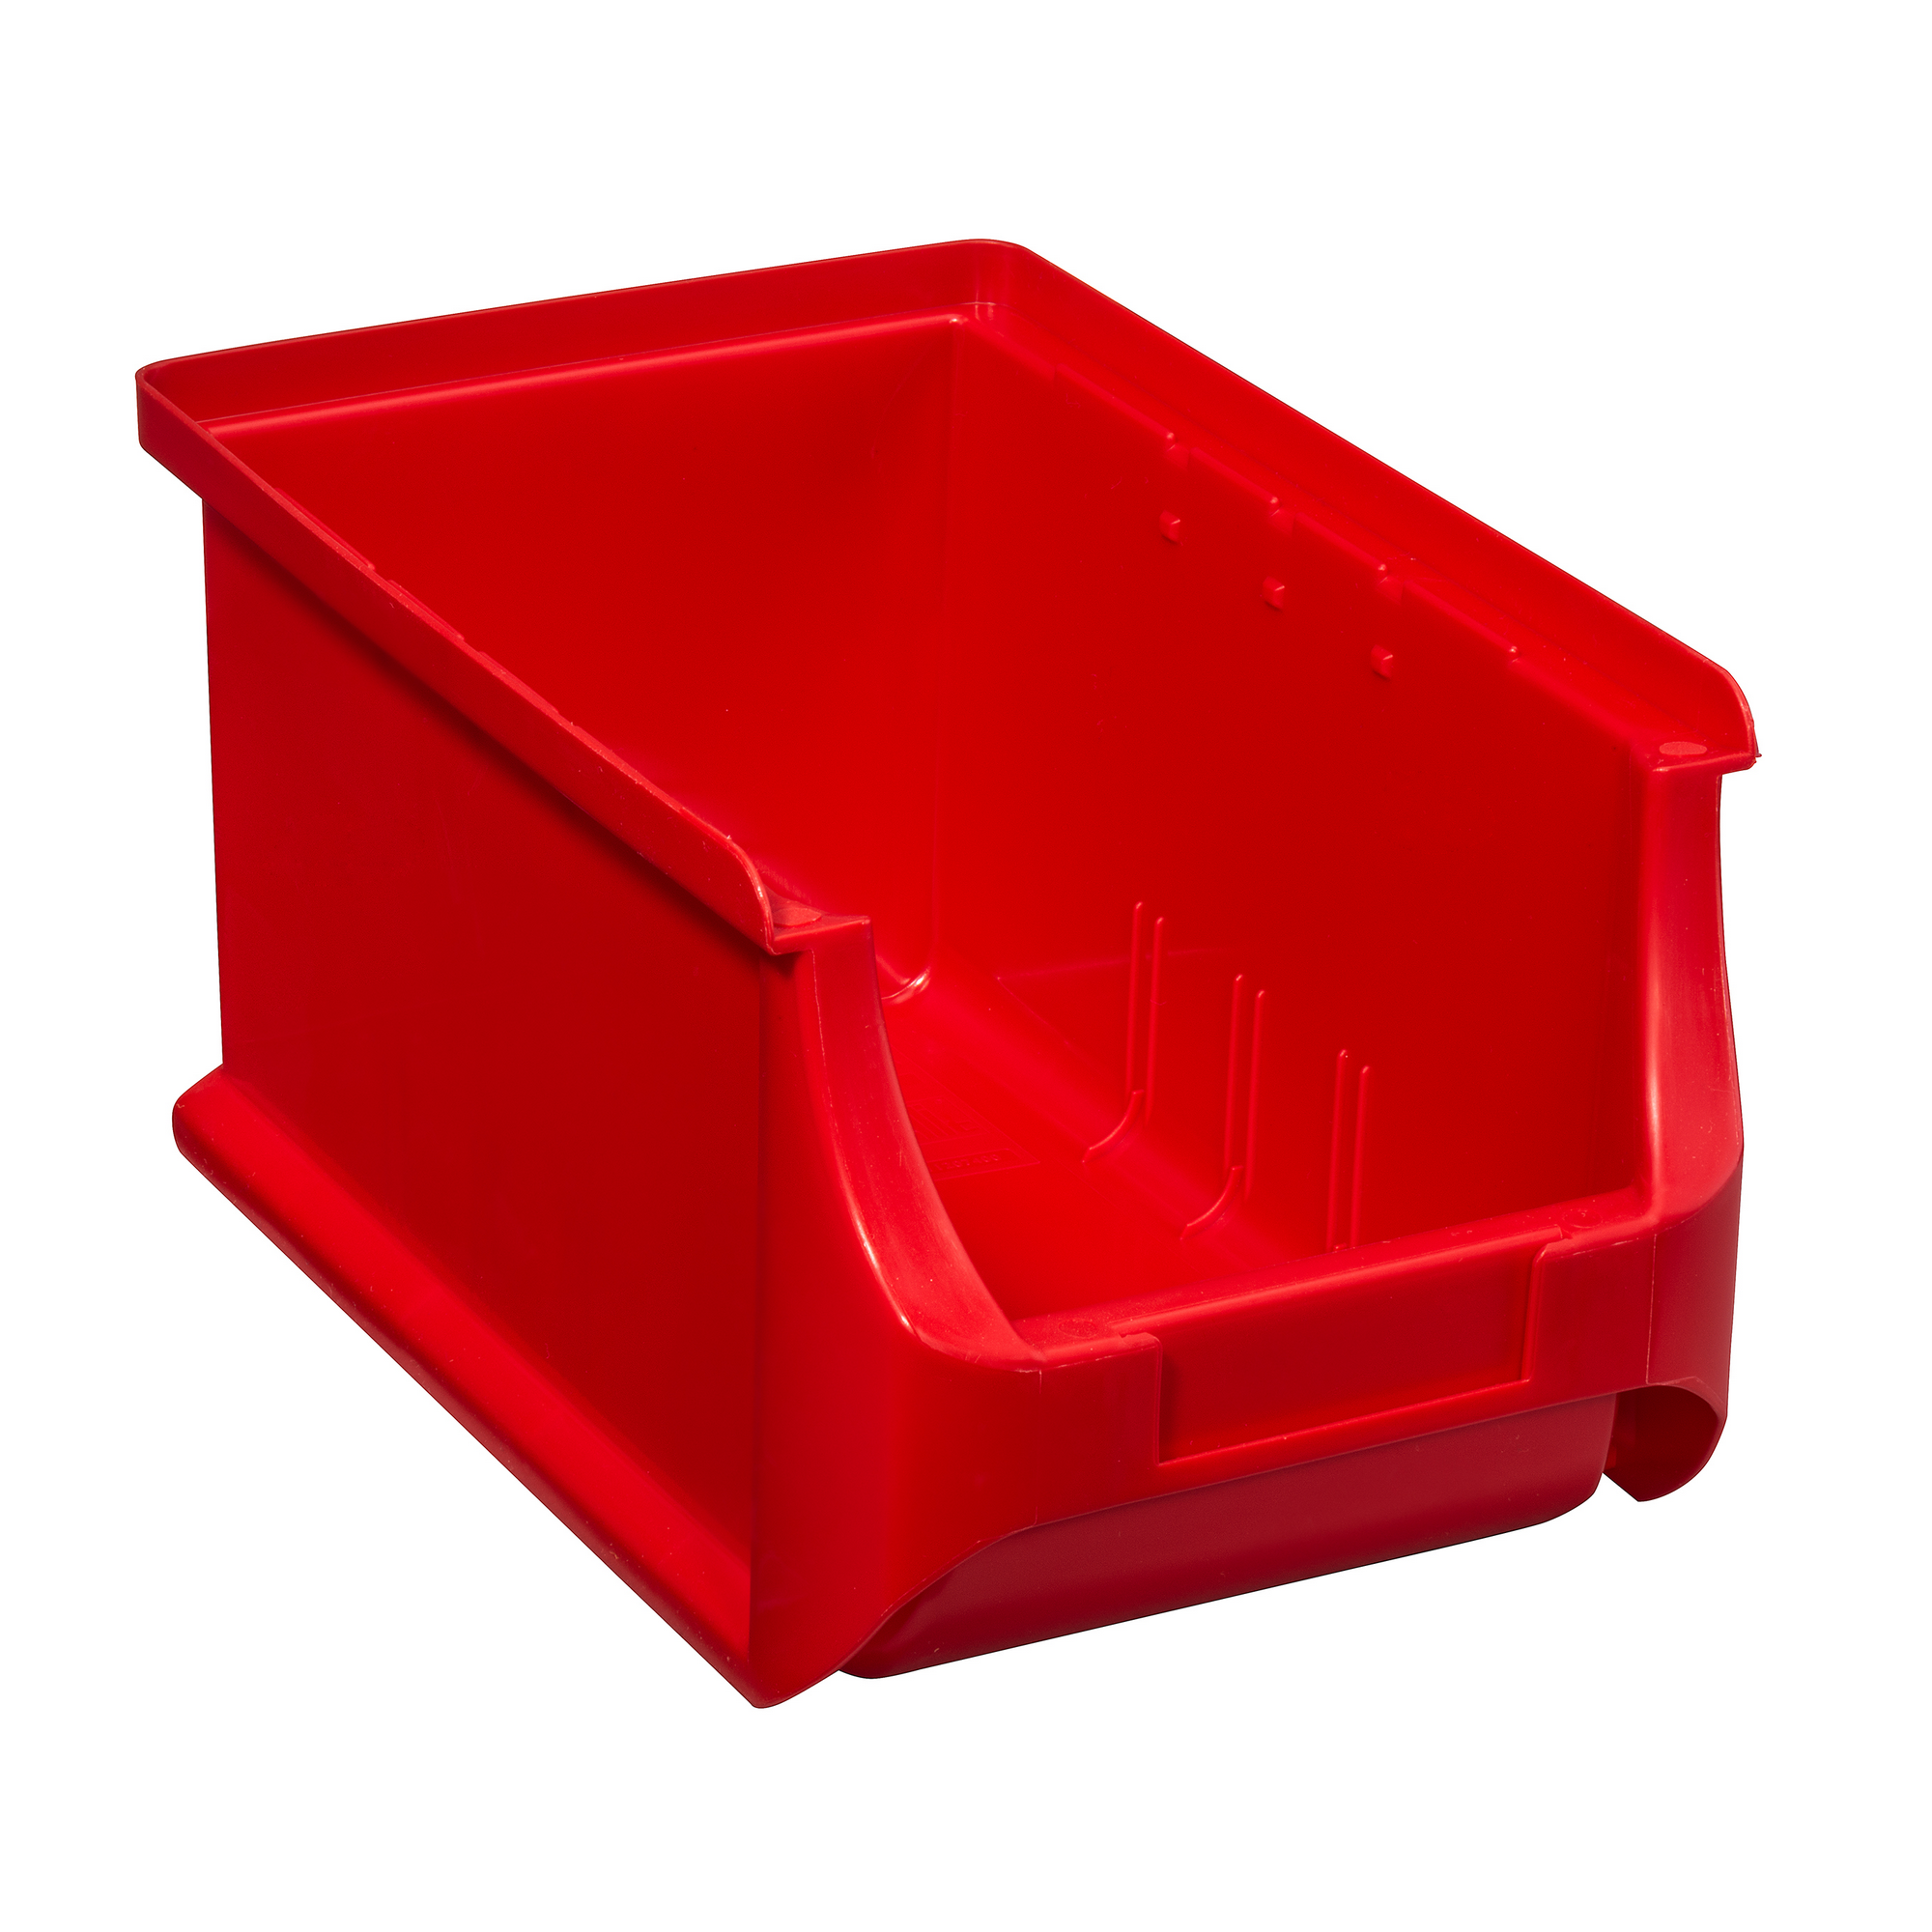 ProfiPlus Stapelsichtbox 'Box 3' rot 23,5 x 15 x 12,5 cm + product picture